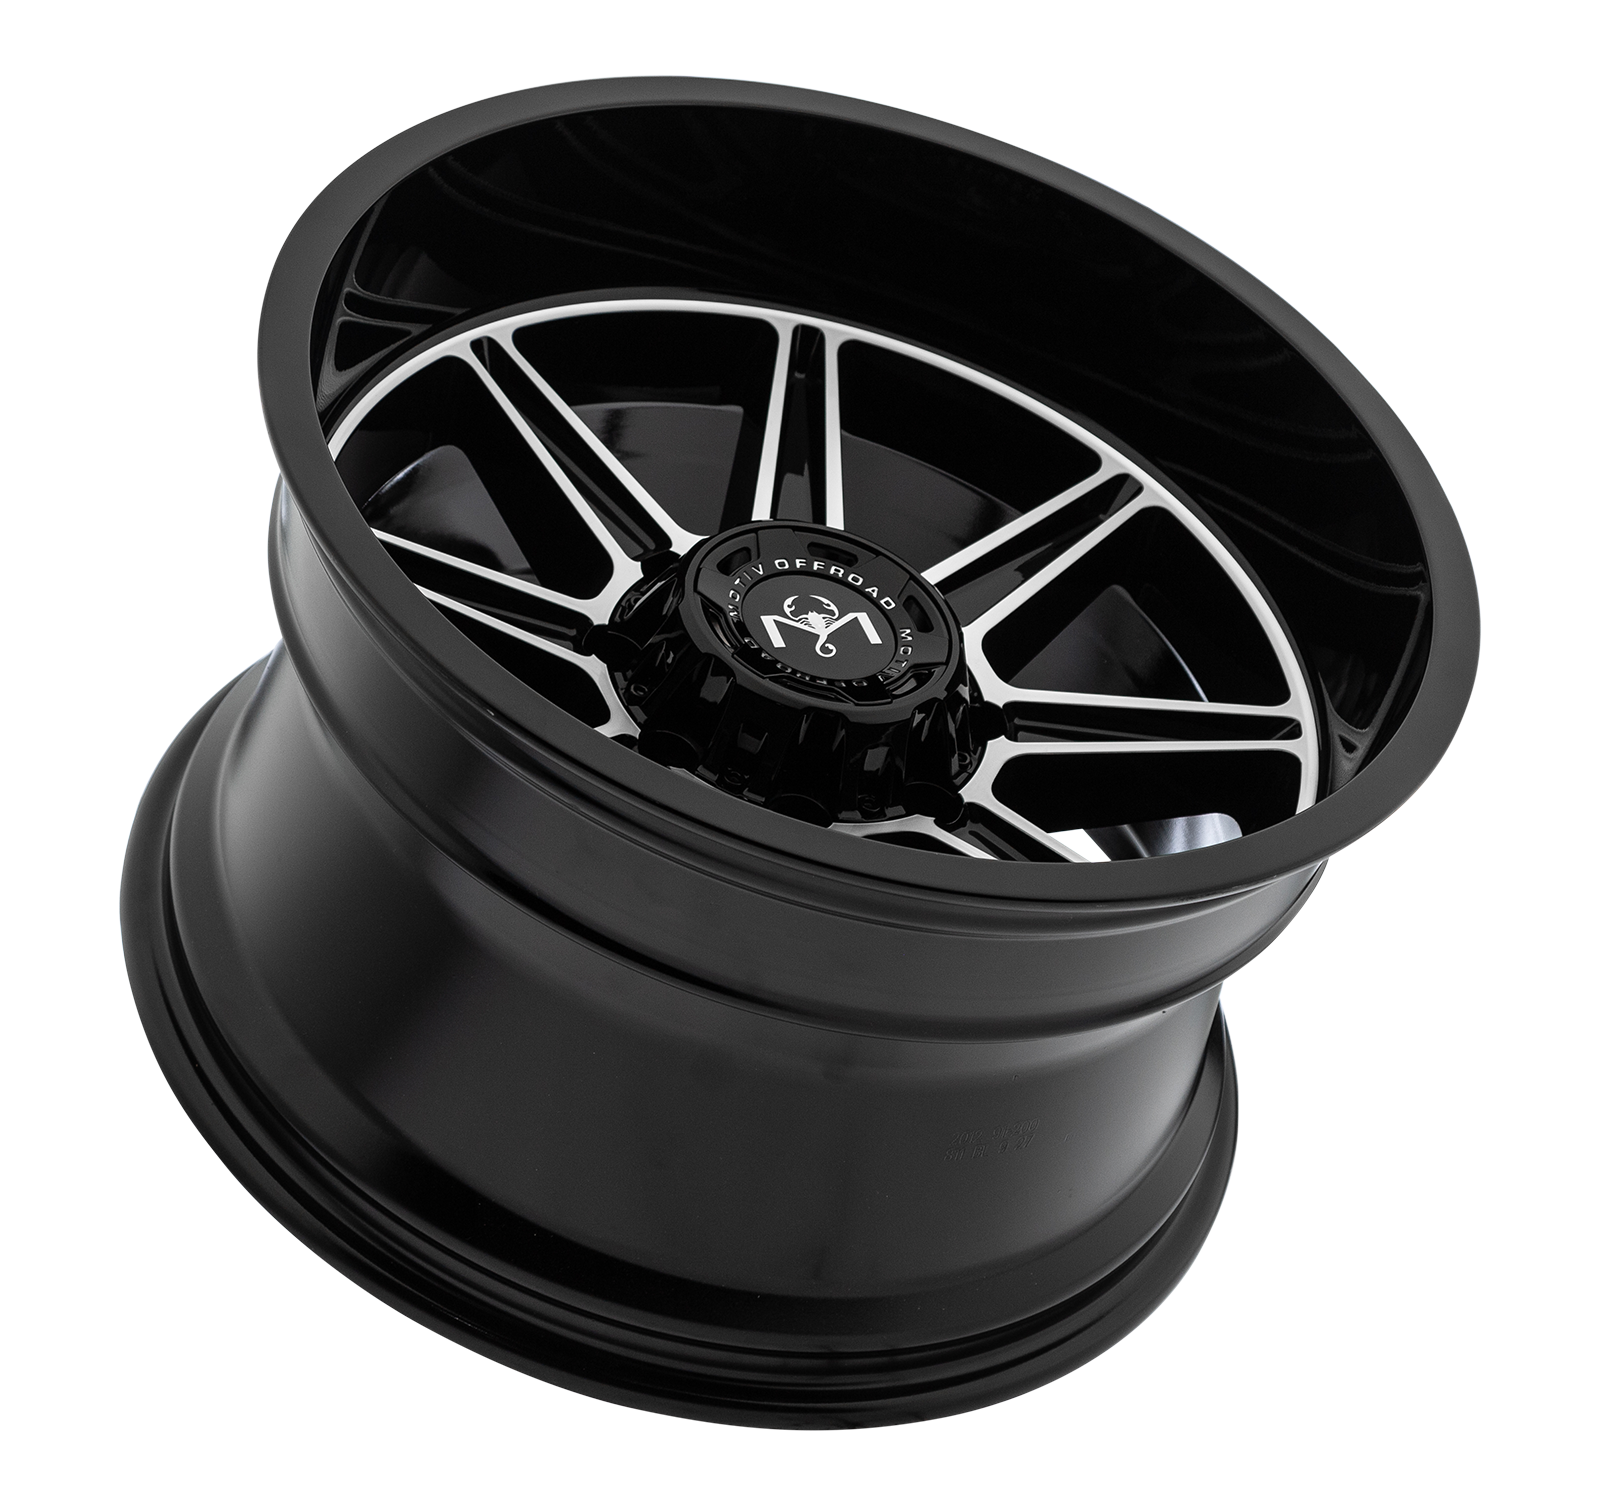 Motiv Off Road BALAST 17X9 +00 8X170 Gloss Black With Machined Face Accents